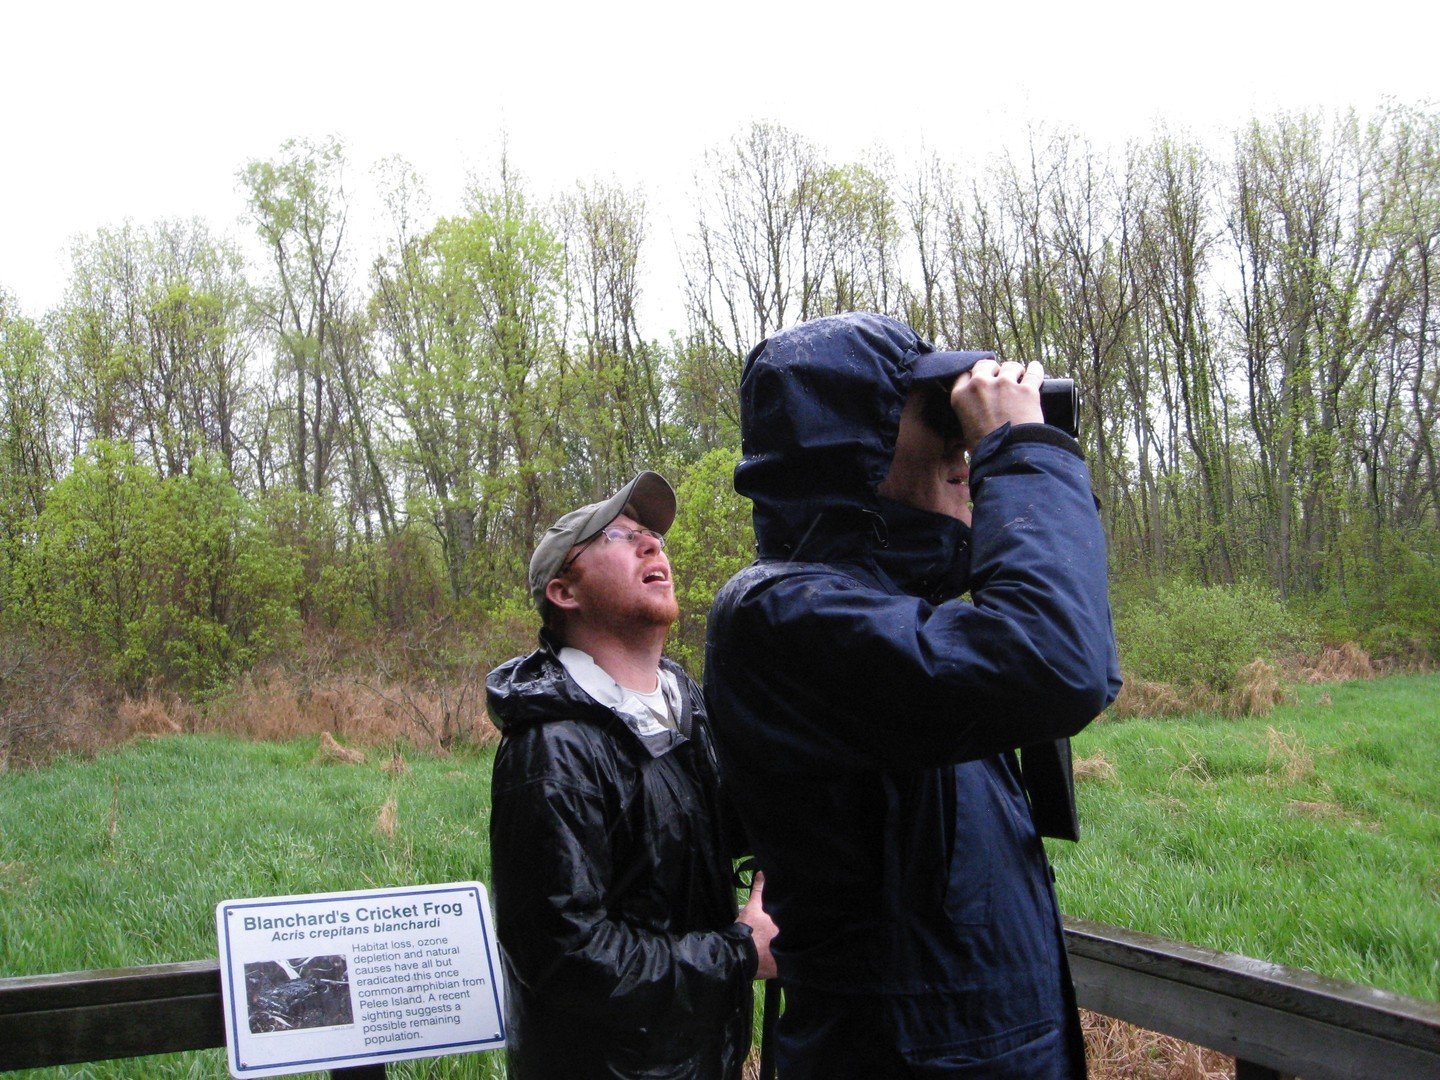 On this week&rsquo;s podcast I played Stuart&rsquo;s essay about birds and bird migration. We recorded it when we visited Point Pelee, Ontario. That was the trip where Stuart found he LOVED birding (and I found that I did not!) I talked about this tr